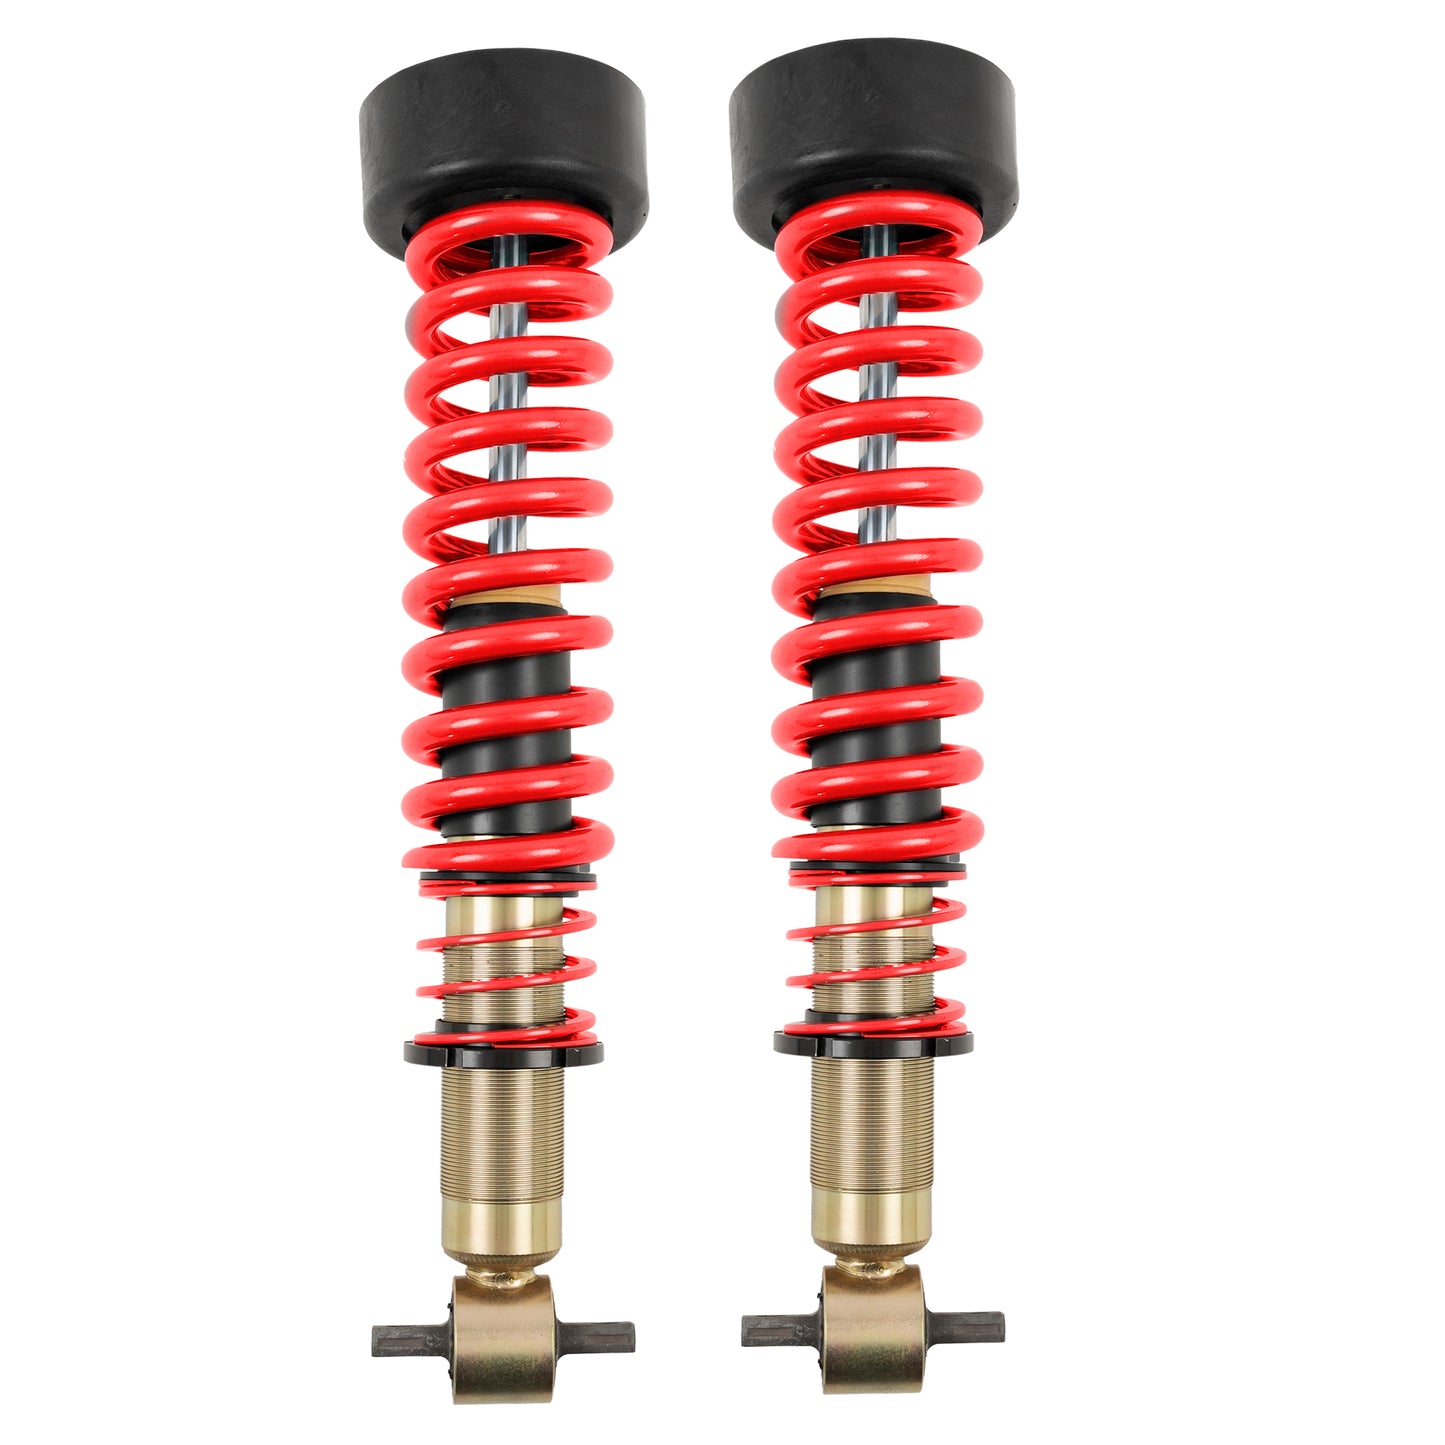 BELLTECH 15103 COILOVER KIT Factory Preset Fixed Damping 0-2in. Height Adjustable lift 2019-2021 Chevrolet Silverado 4wd 0 - 2in. Lift (fixed dampening)